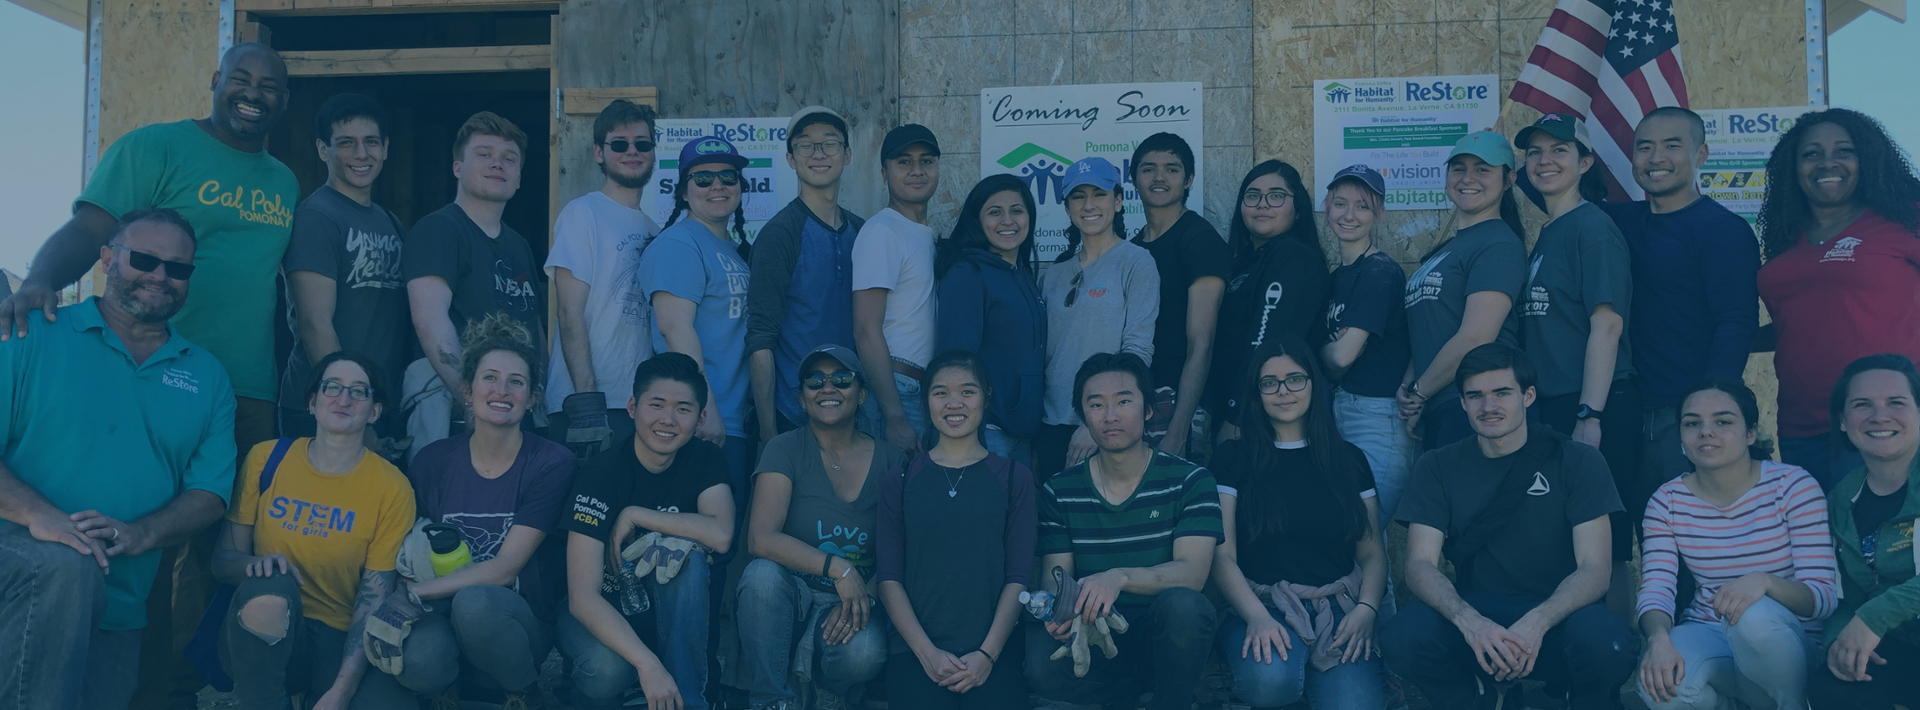 Volunteers from Cal Poly Pomona posing for a photo after a community engagement event